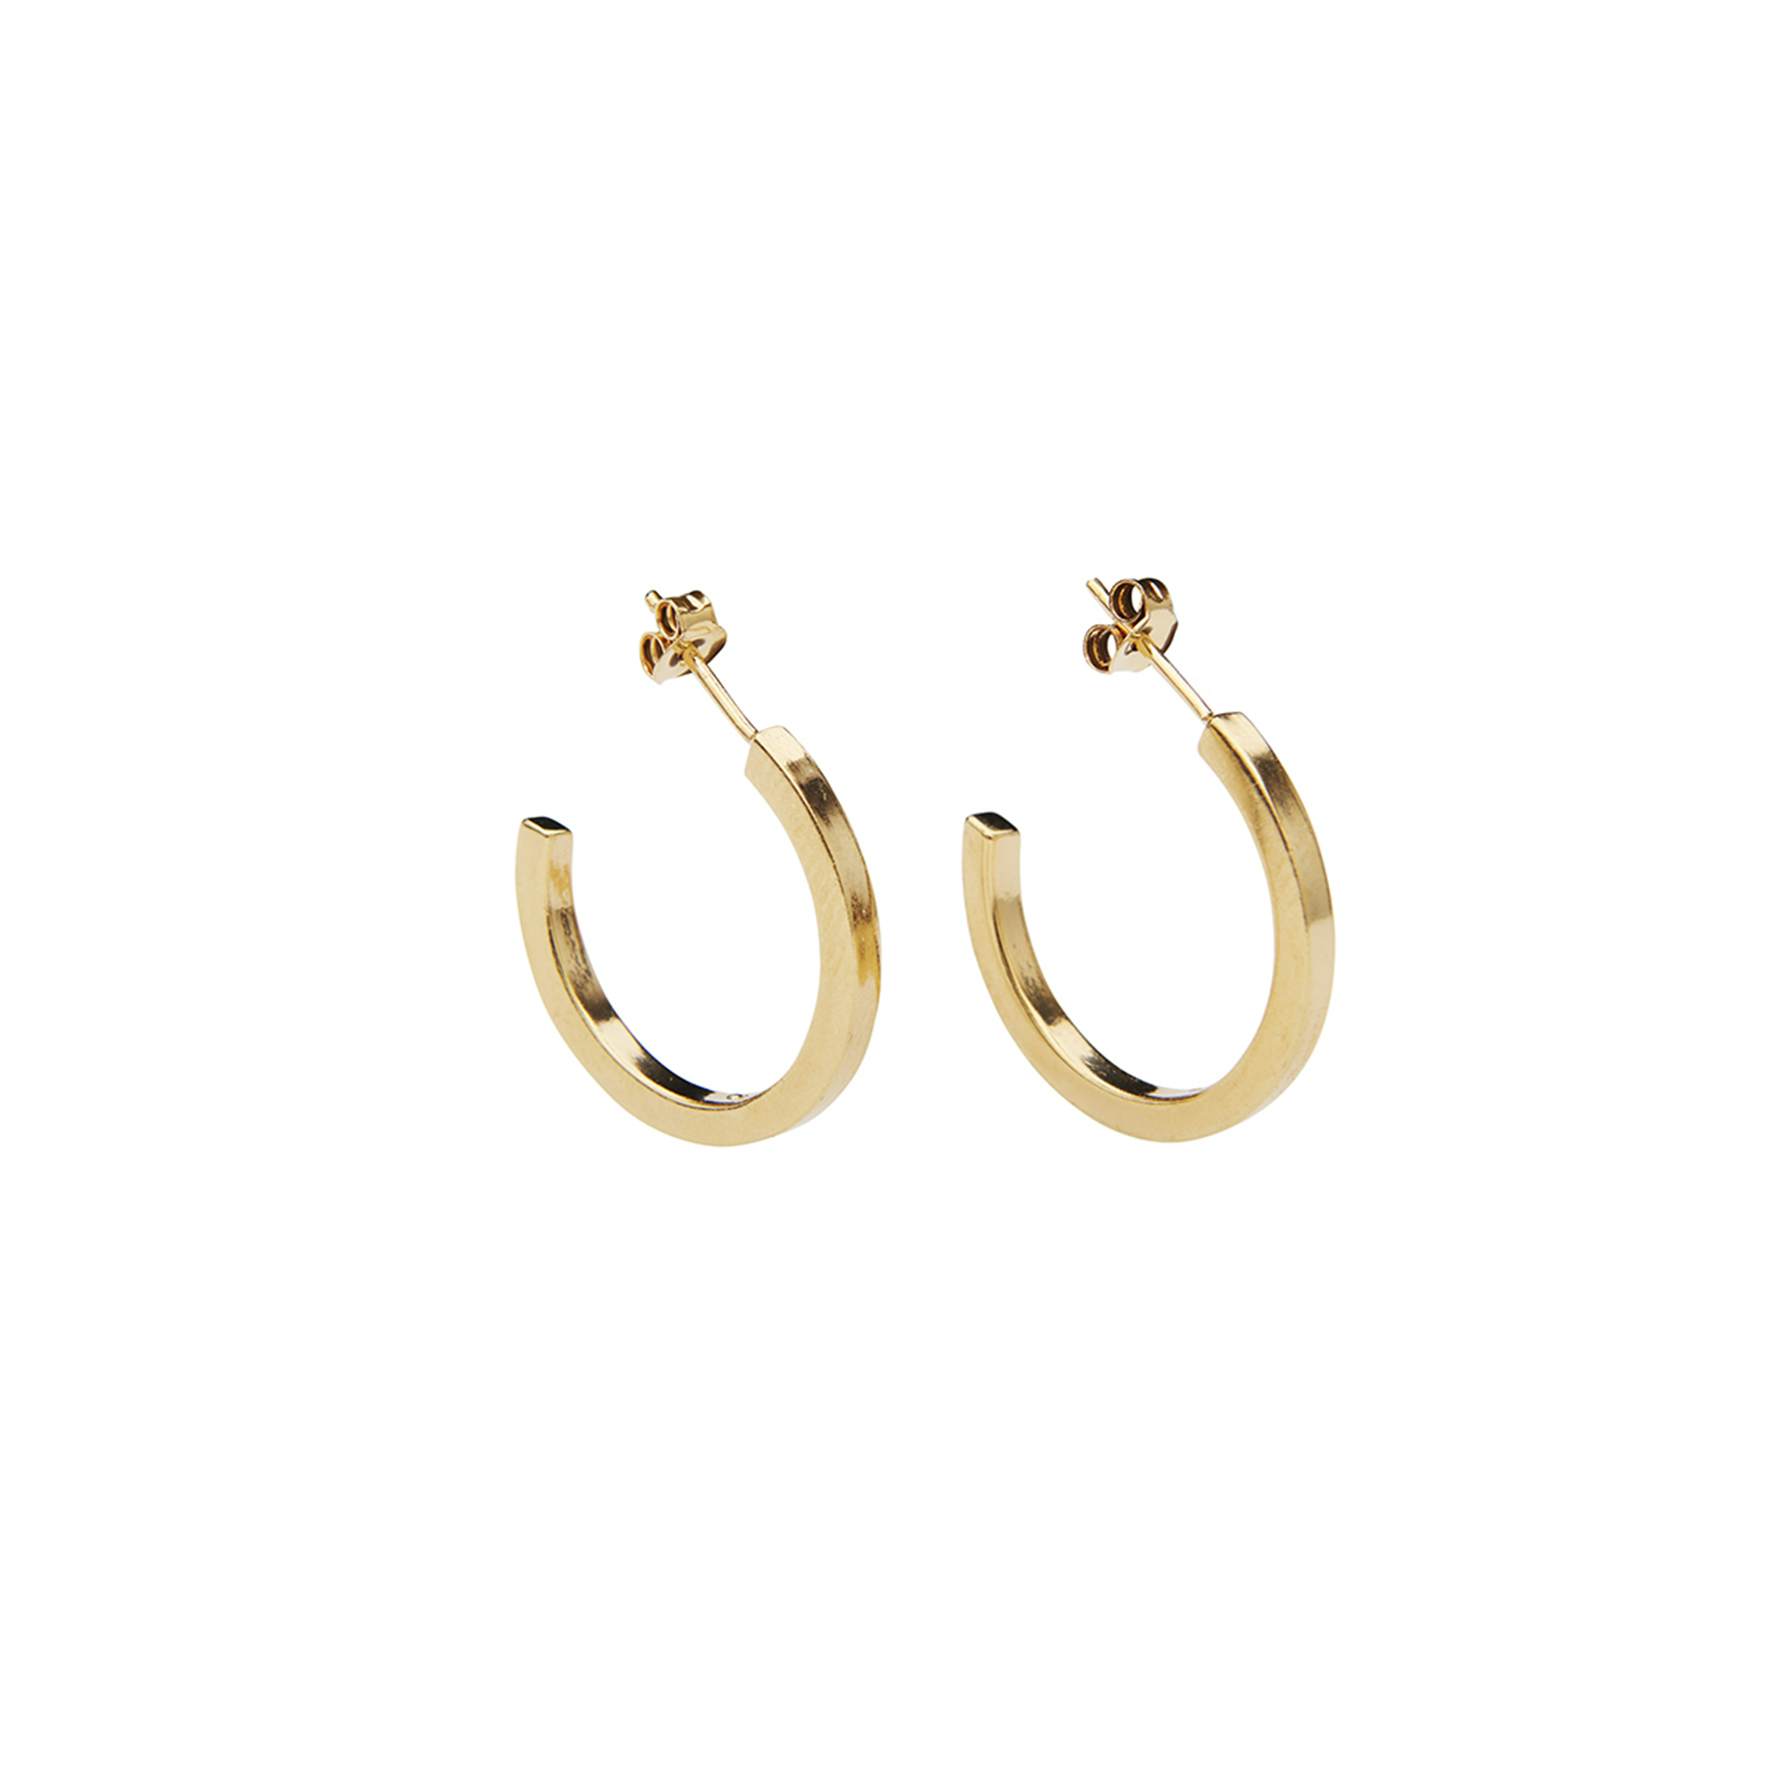 Cerise Studs from Pico in Goldplated-Silver Sterling 925